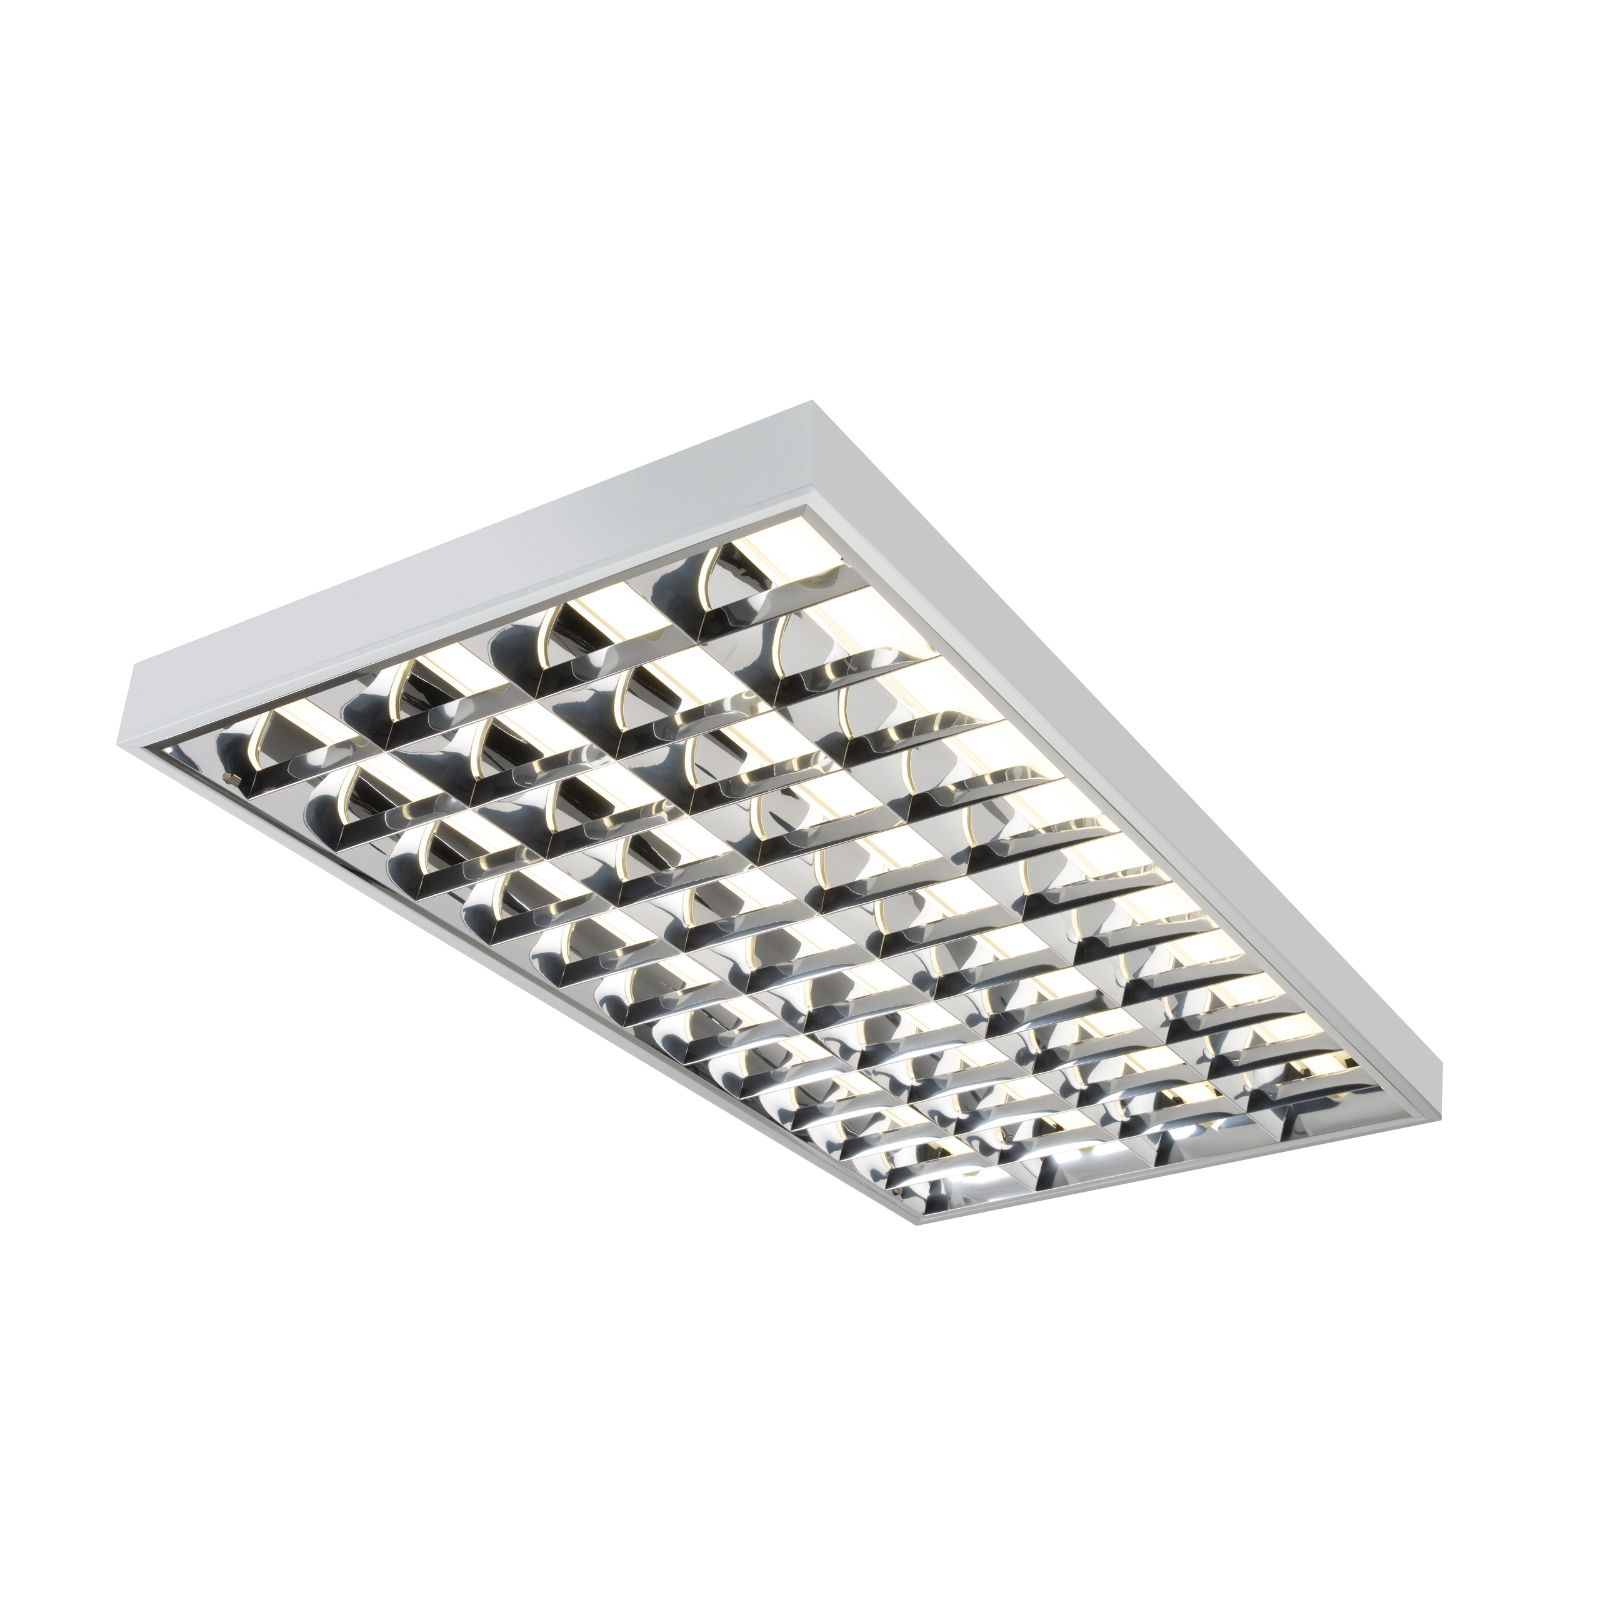 IP20 4x36W T8 CAT2 Surface Mounted Emergency Fluorescent Fitting 1220x600x80mm - SURF436EMHF 